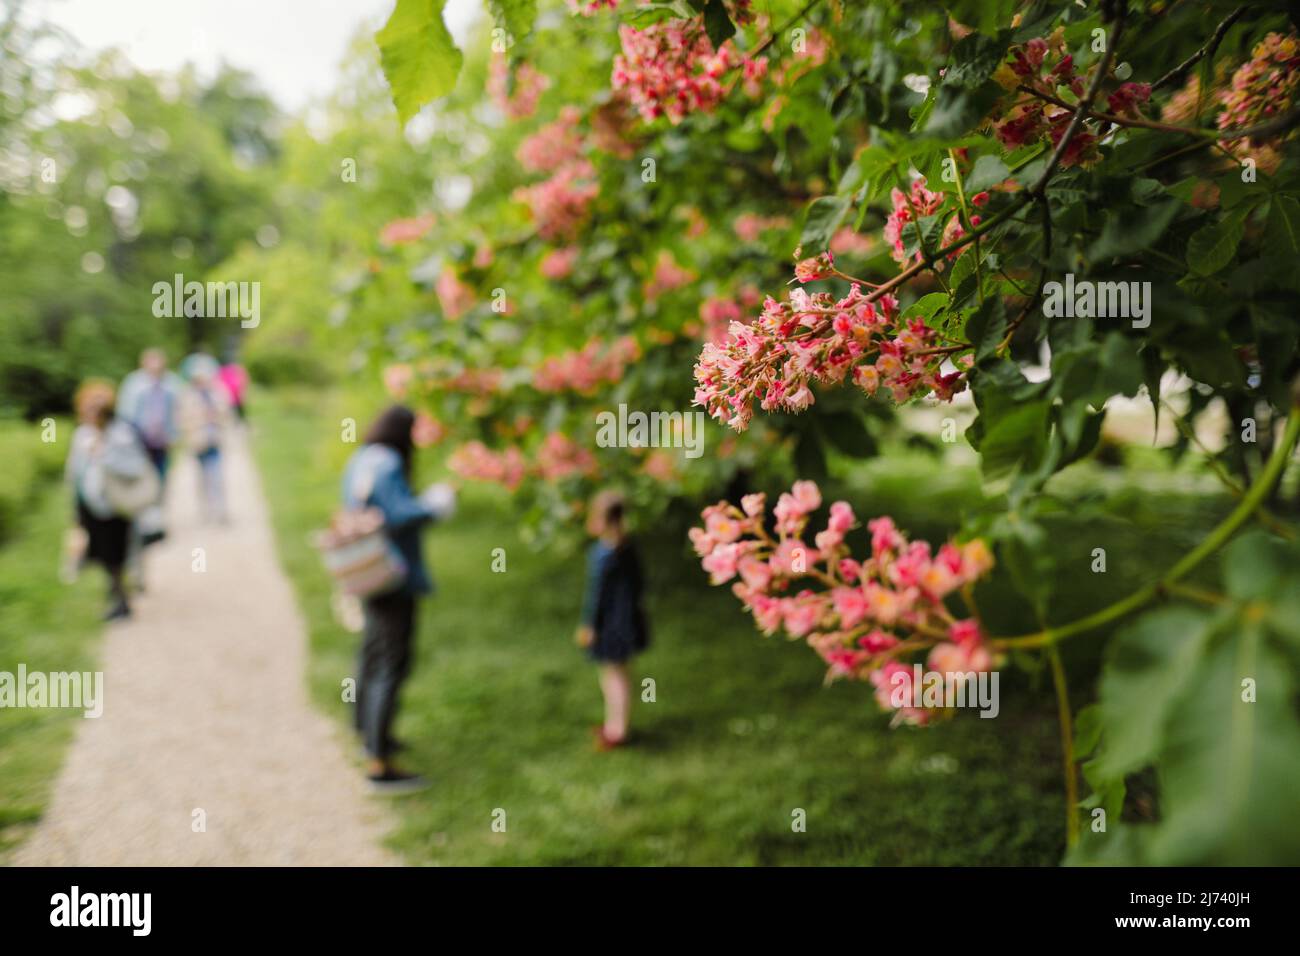 Shallow depth of field details with red chestnut tree flowers in a public park during a sunny spring day. Stock Photo